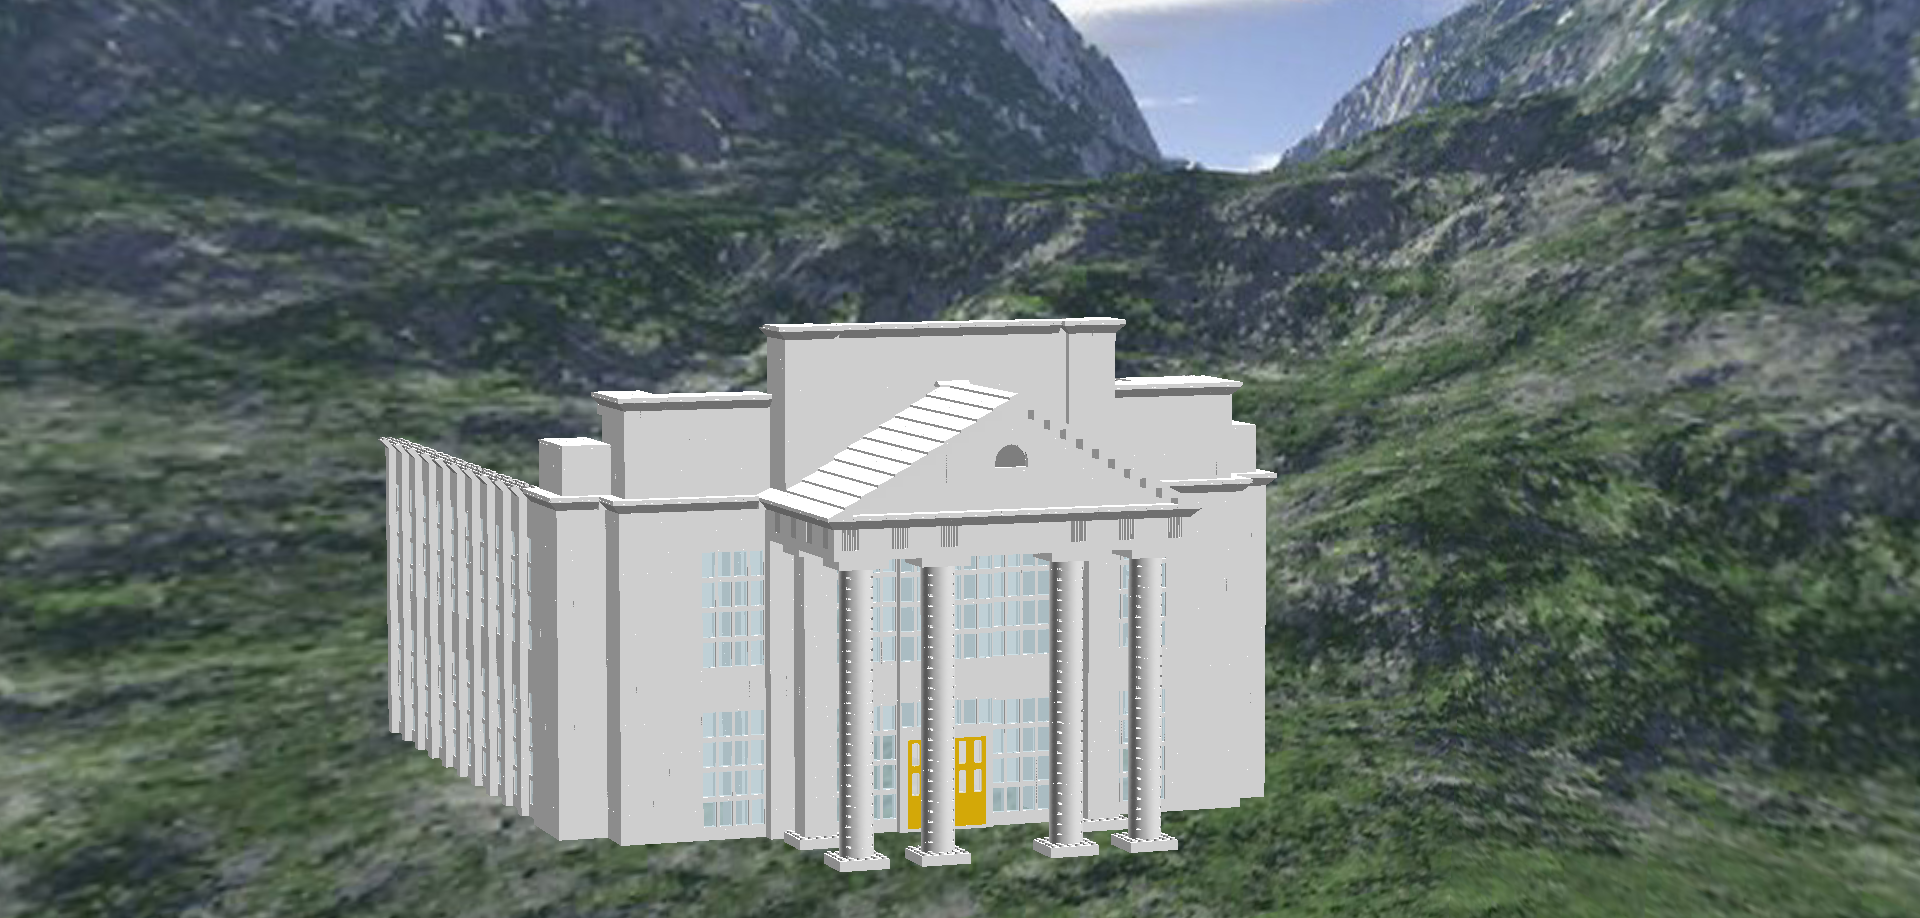 RVA Temple - not finished